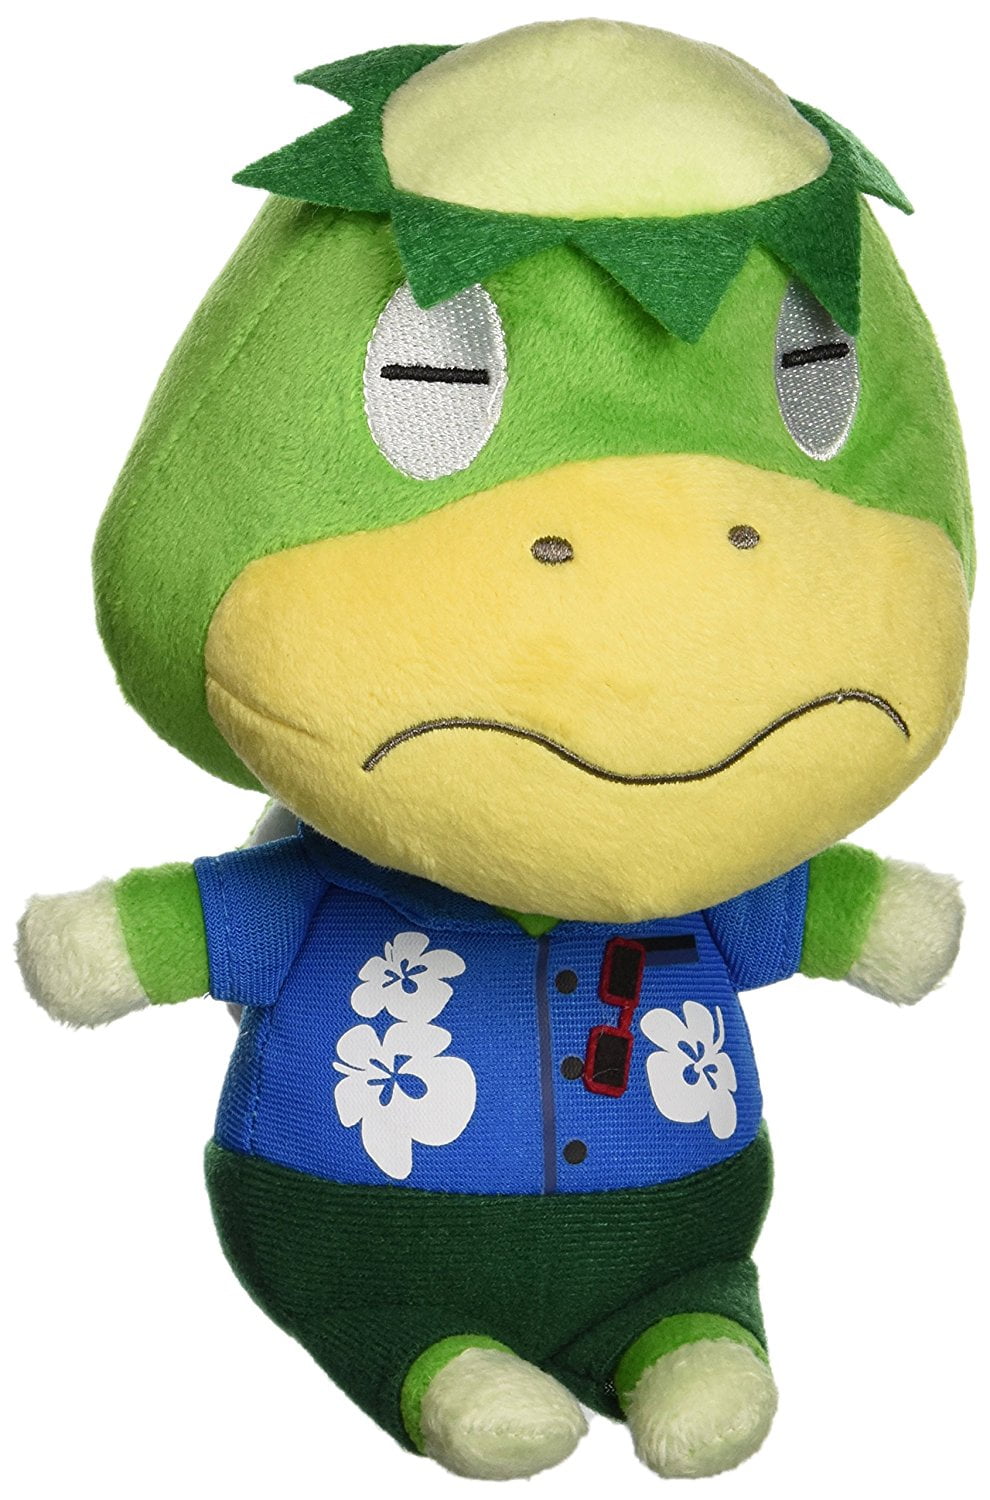 Usual Store Animal Crossing New Leaf 8 inch Villager Plush Doll Stuffed Animal Toy Gift Audie 